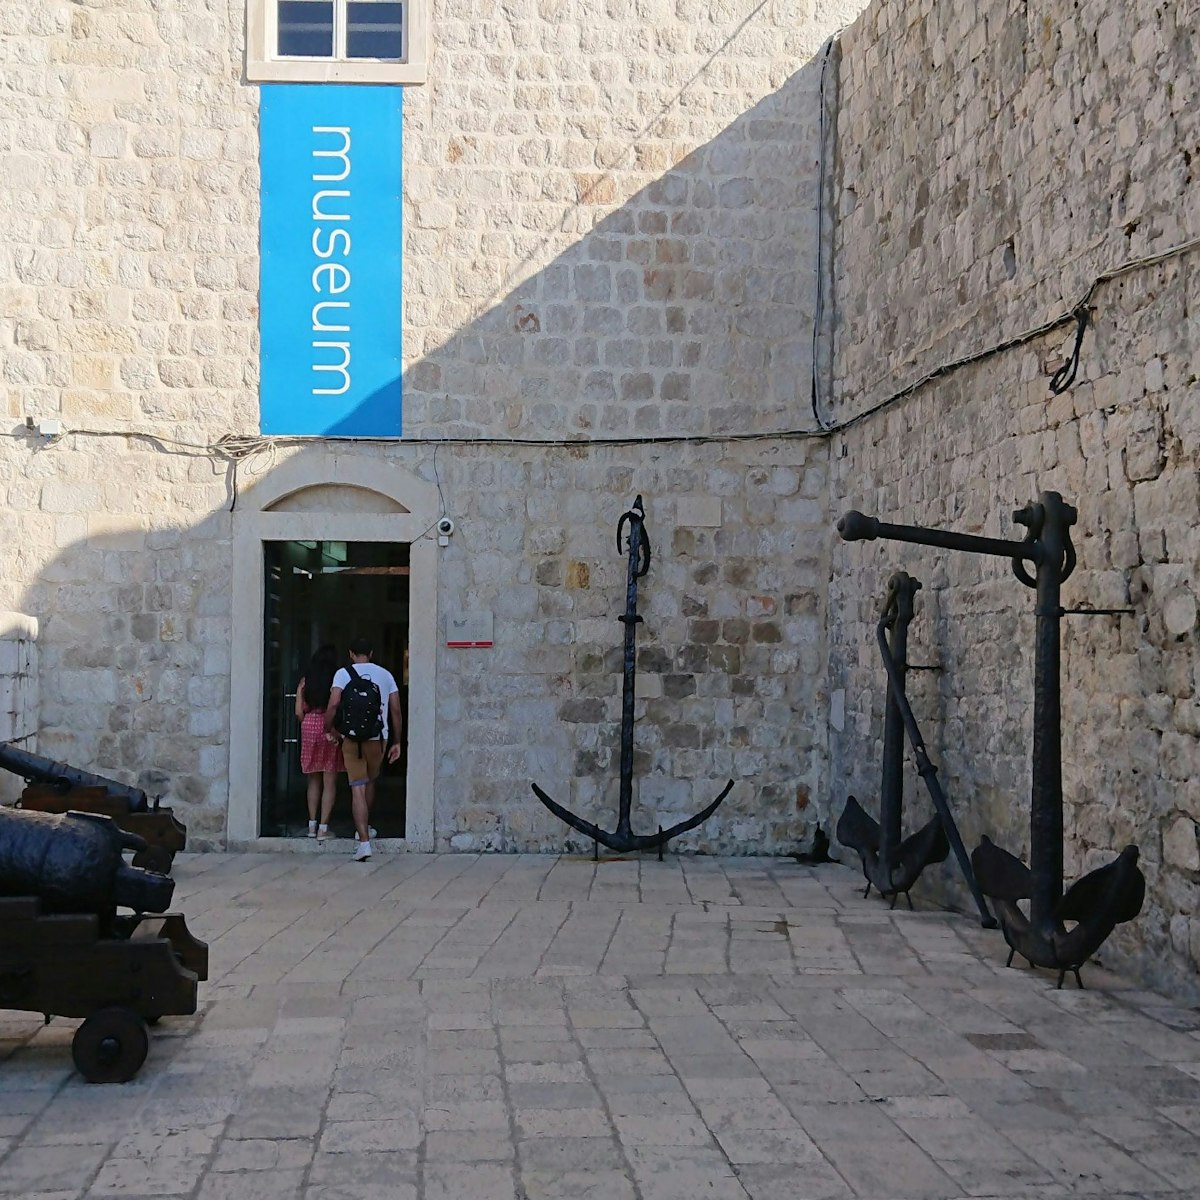 Maritime museum entrance in the fort of St. John